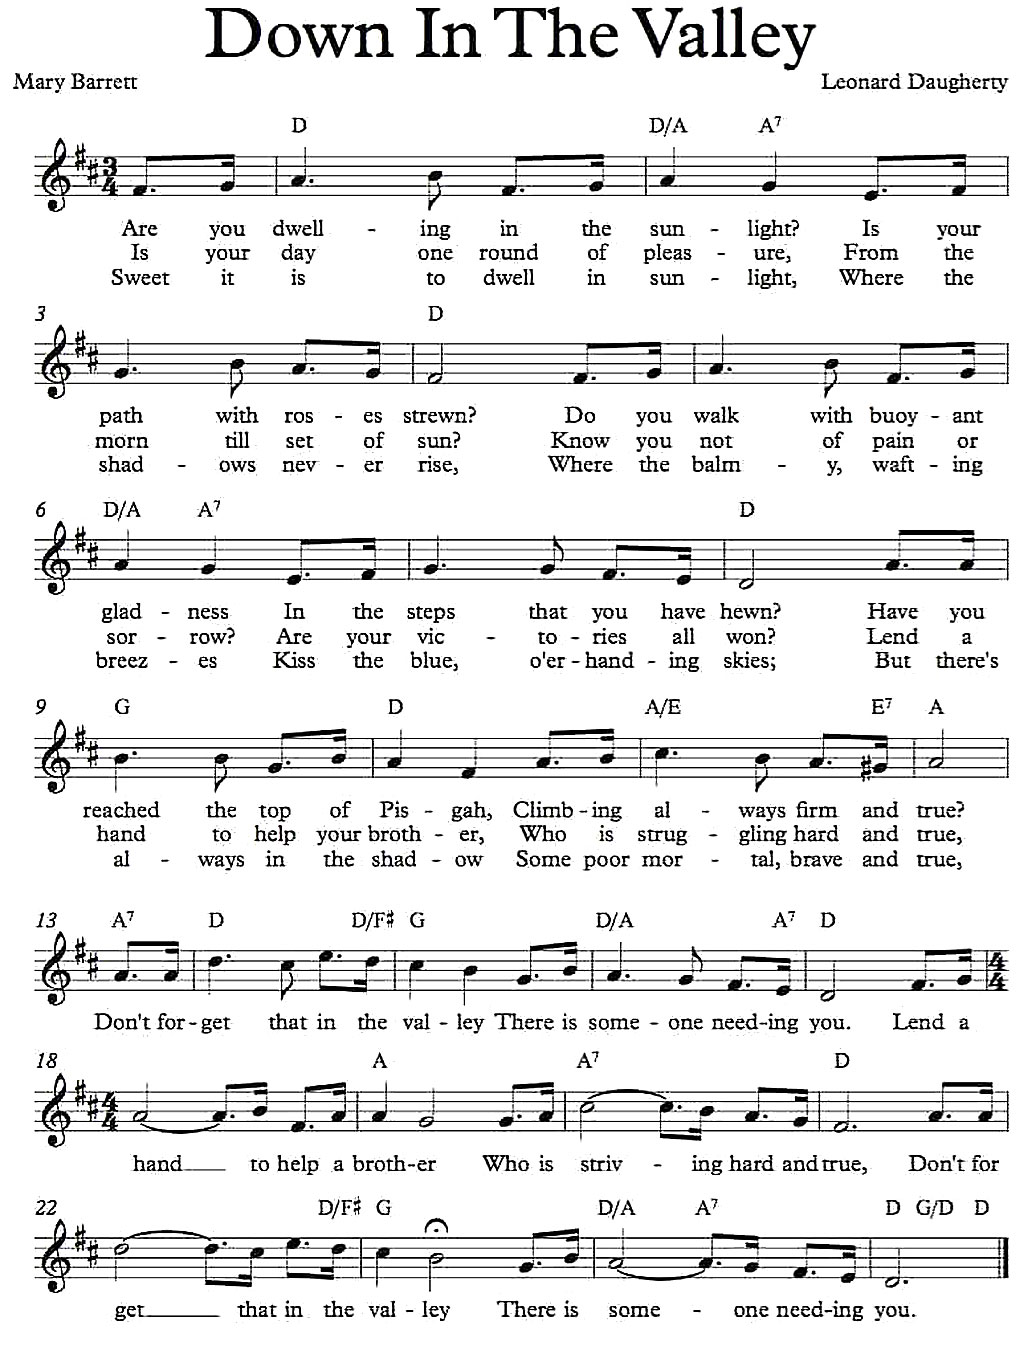 down in the valley sheet music notes